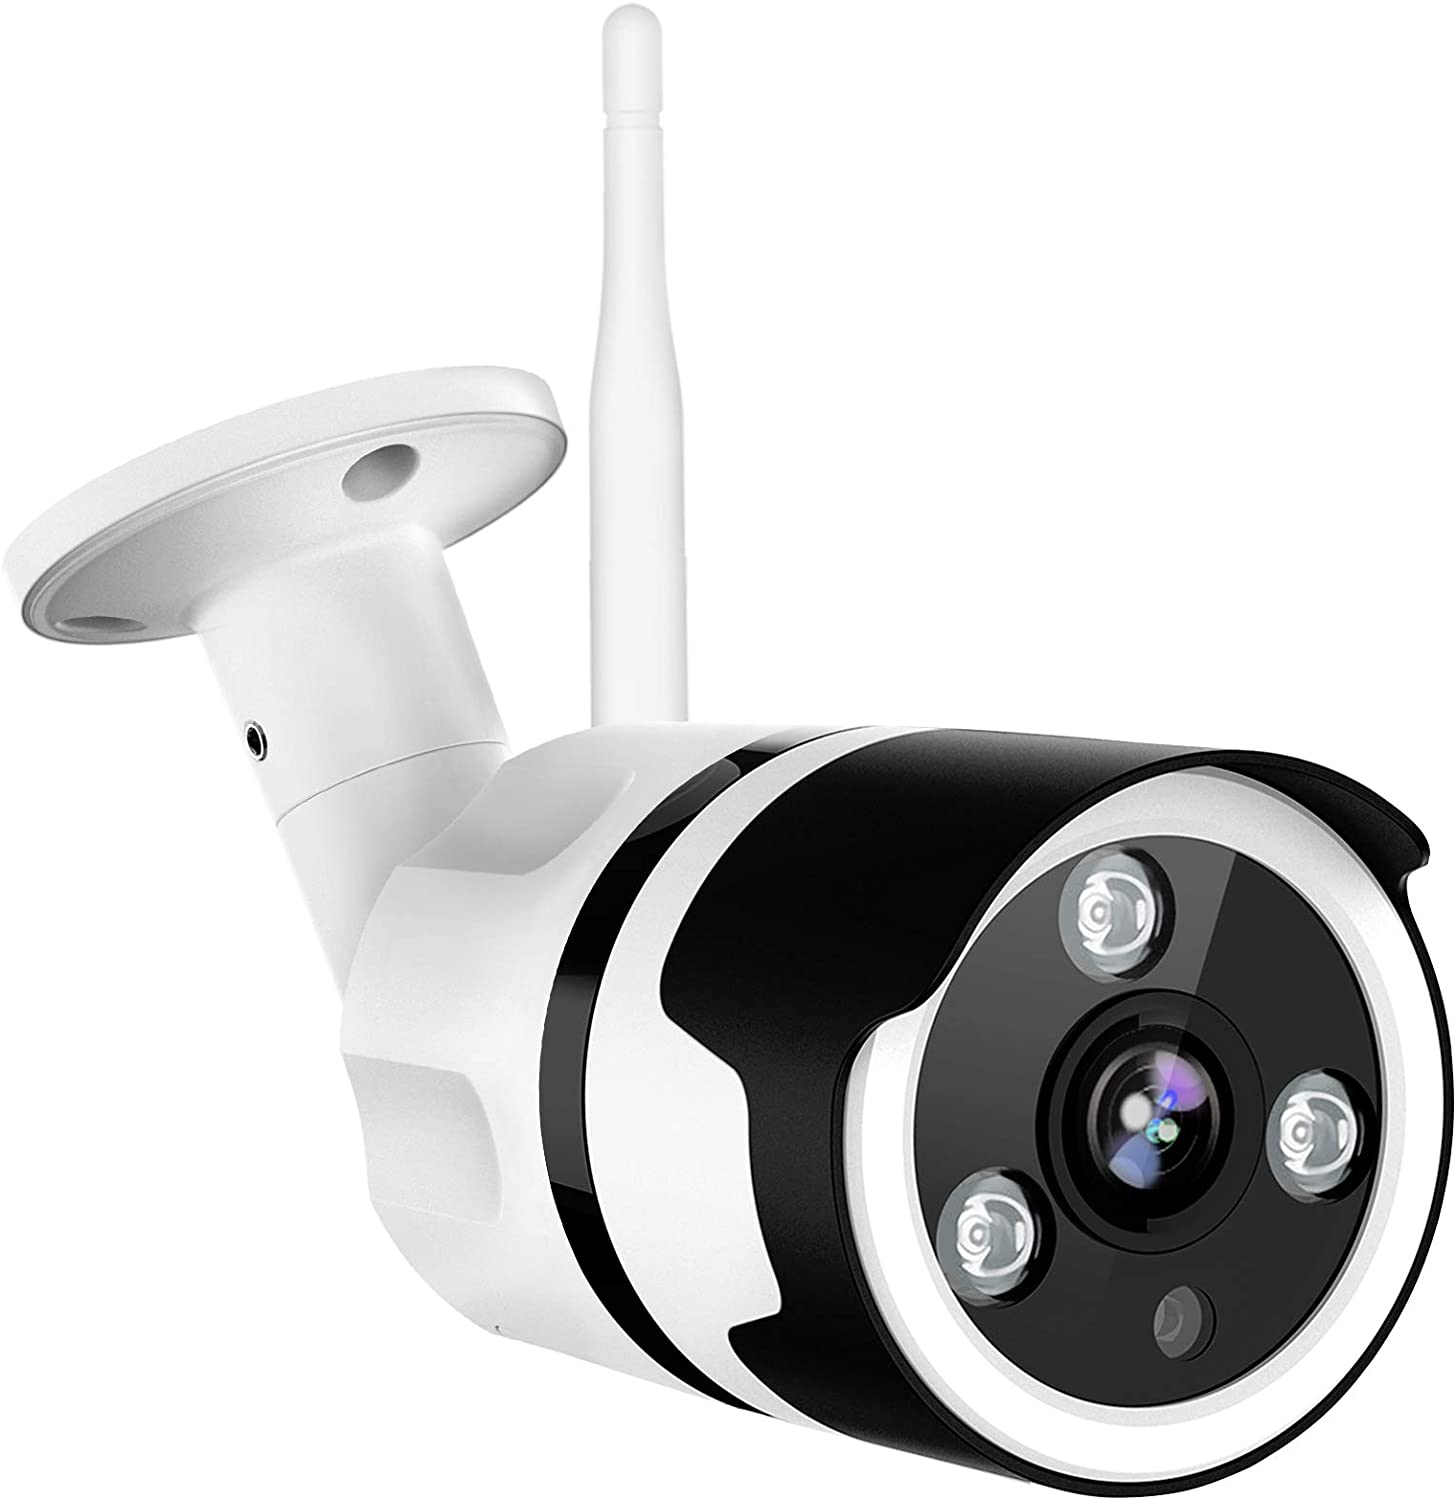 Best Wireless Security Camera Systems for Home - Netvue Bullet Security Camera